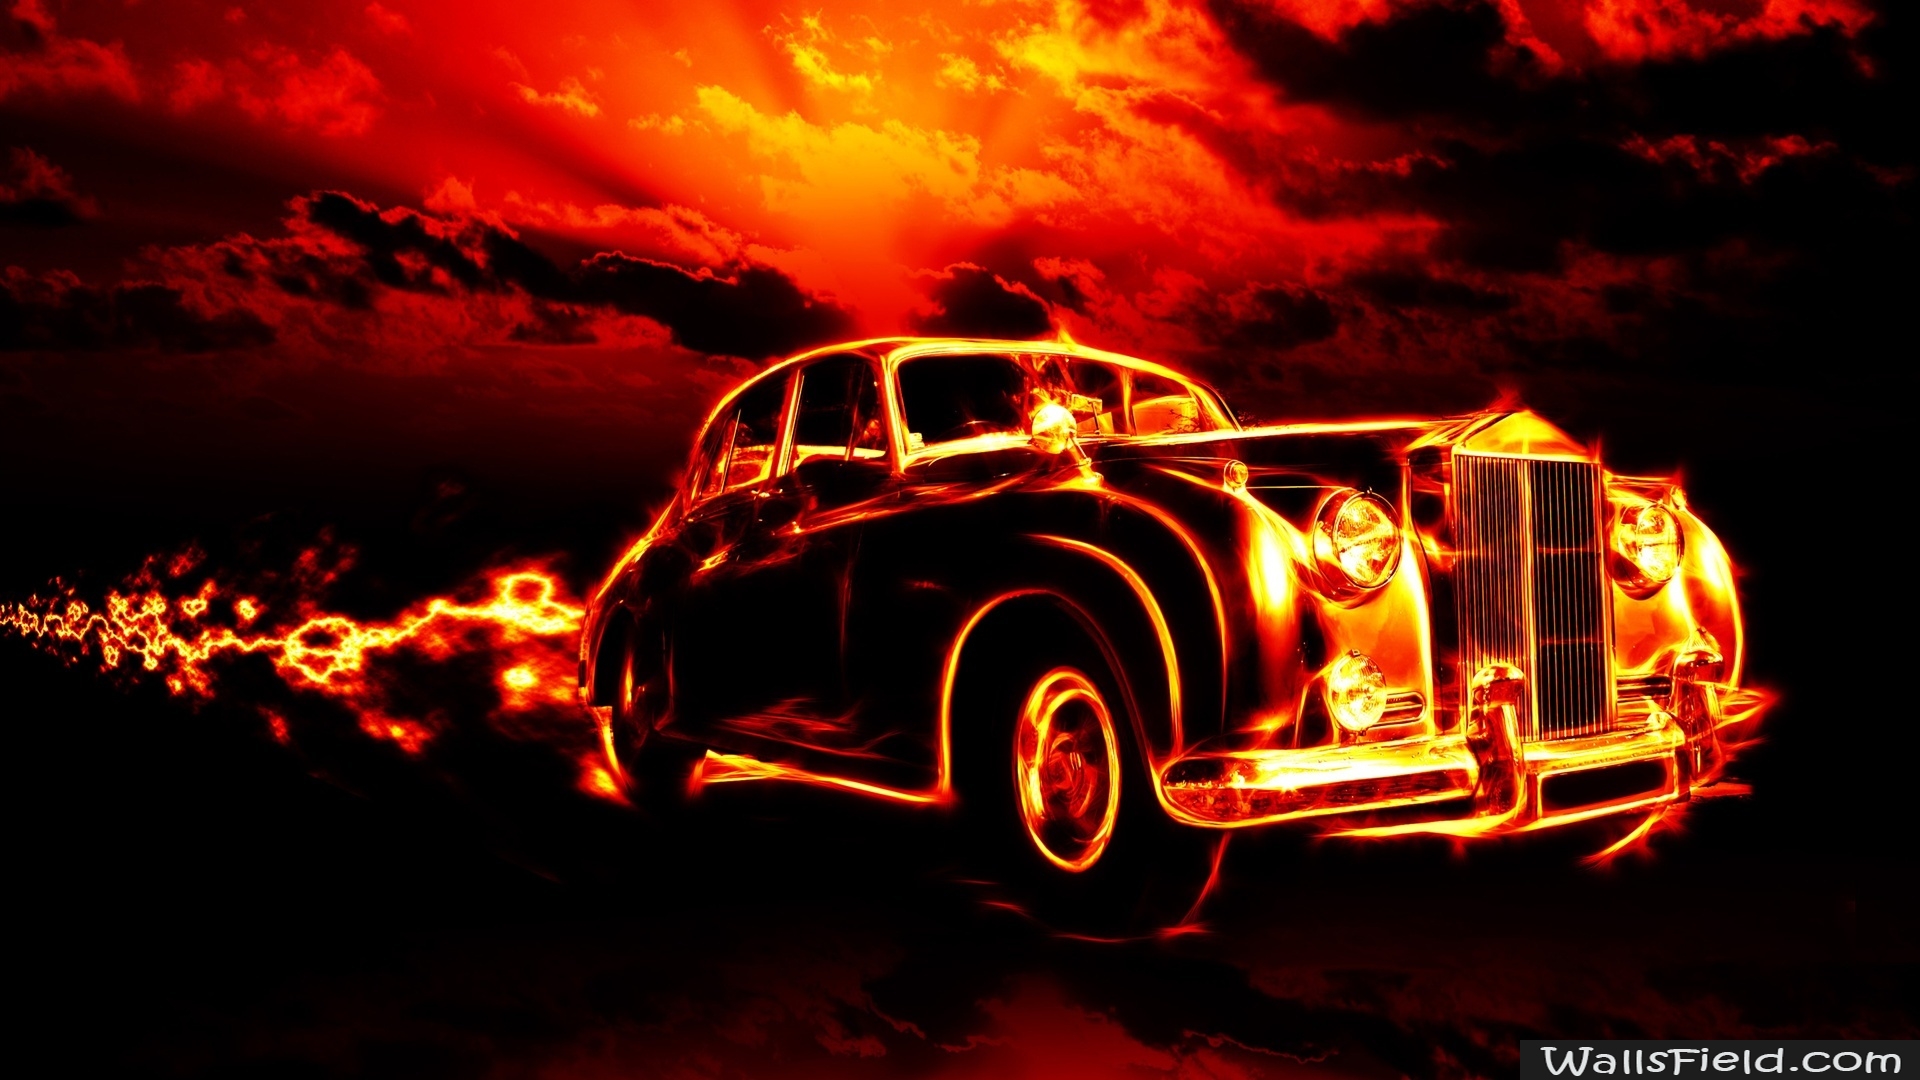 Download Wallpaper Available Resolutions Old Cars On Fire Images, Photos, Reviews